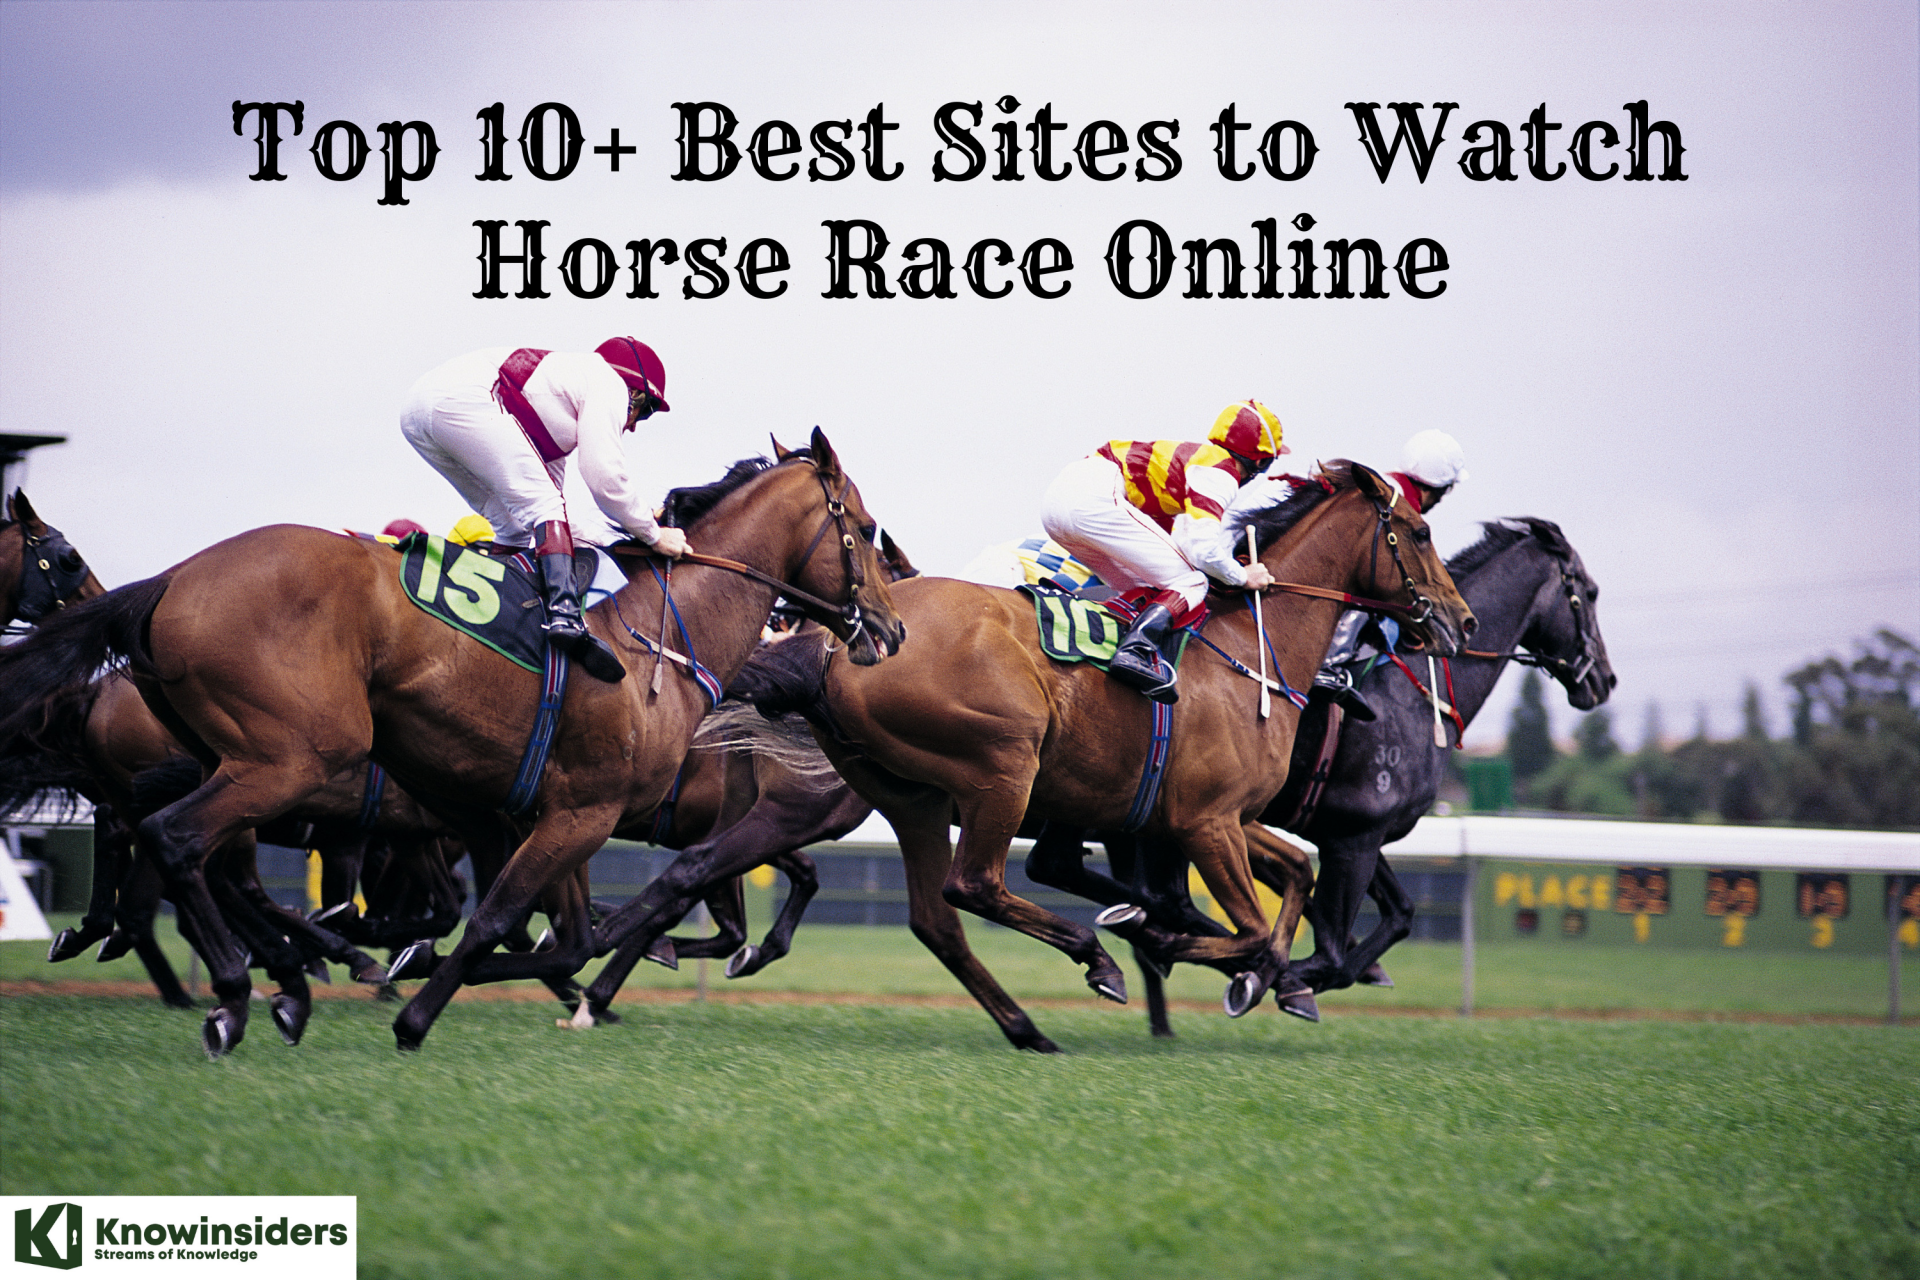 Top 10+ Best Free Sites to Watch Horse Race Online